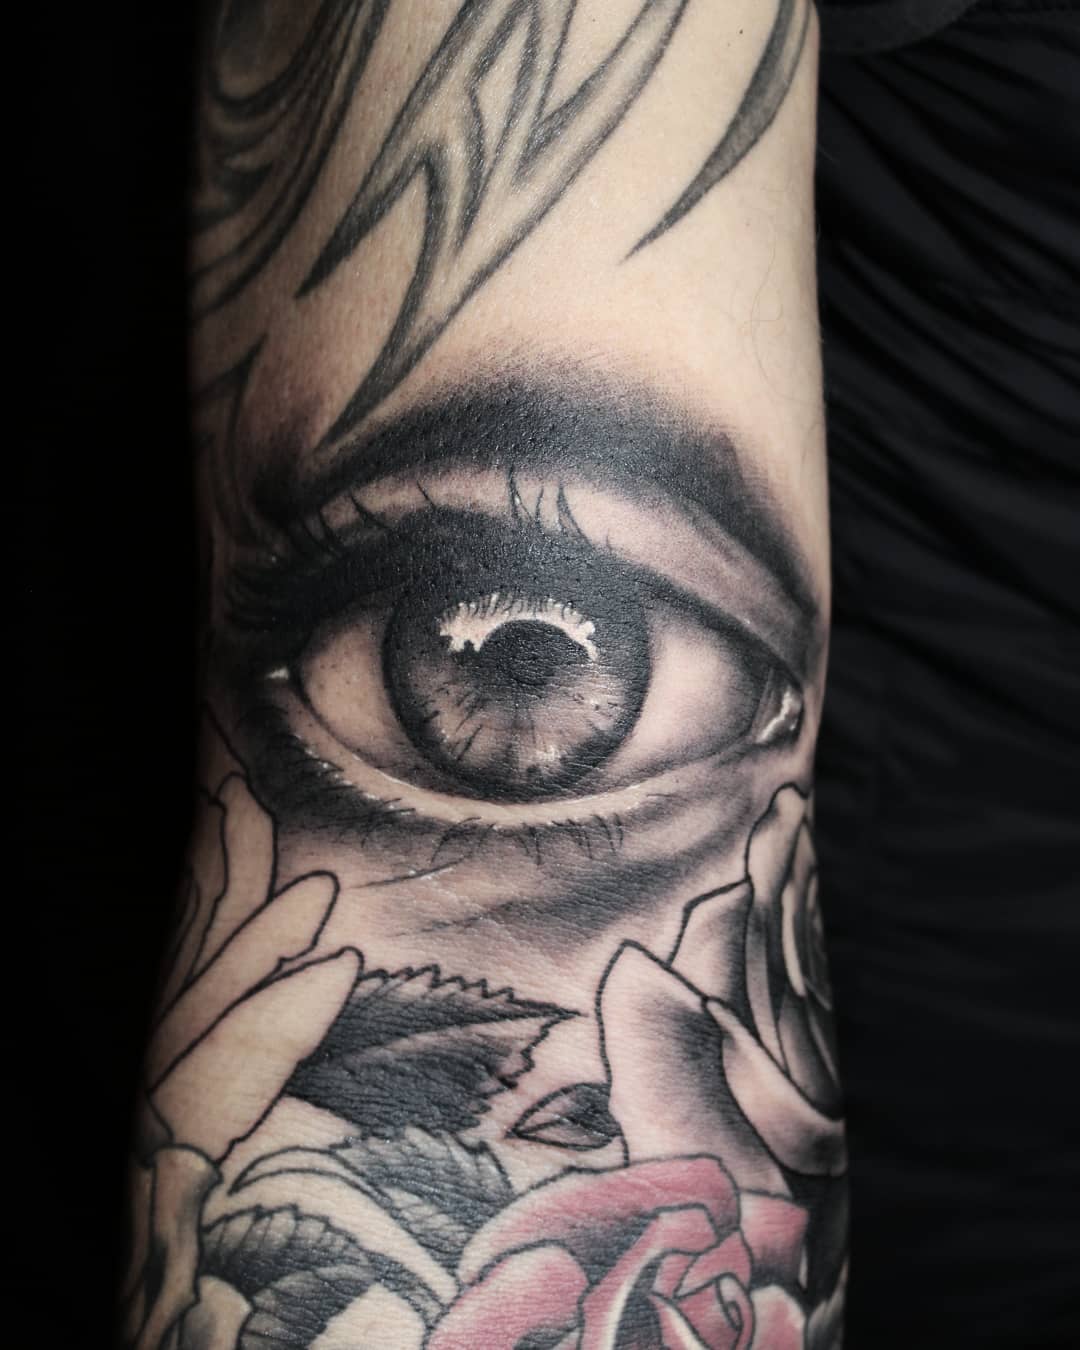 Little filler from yesterday. Thank you so much dirk.
#germantattooers #tattoowo